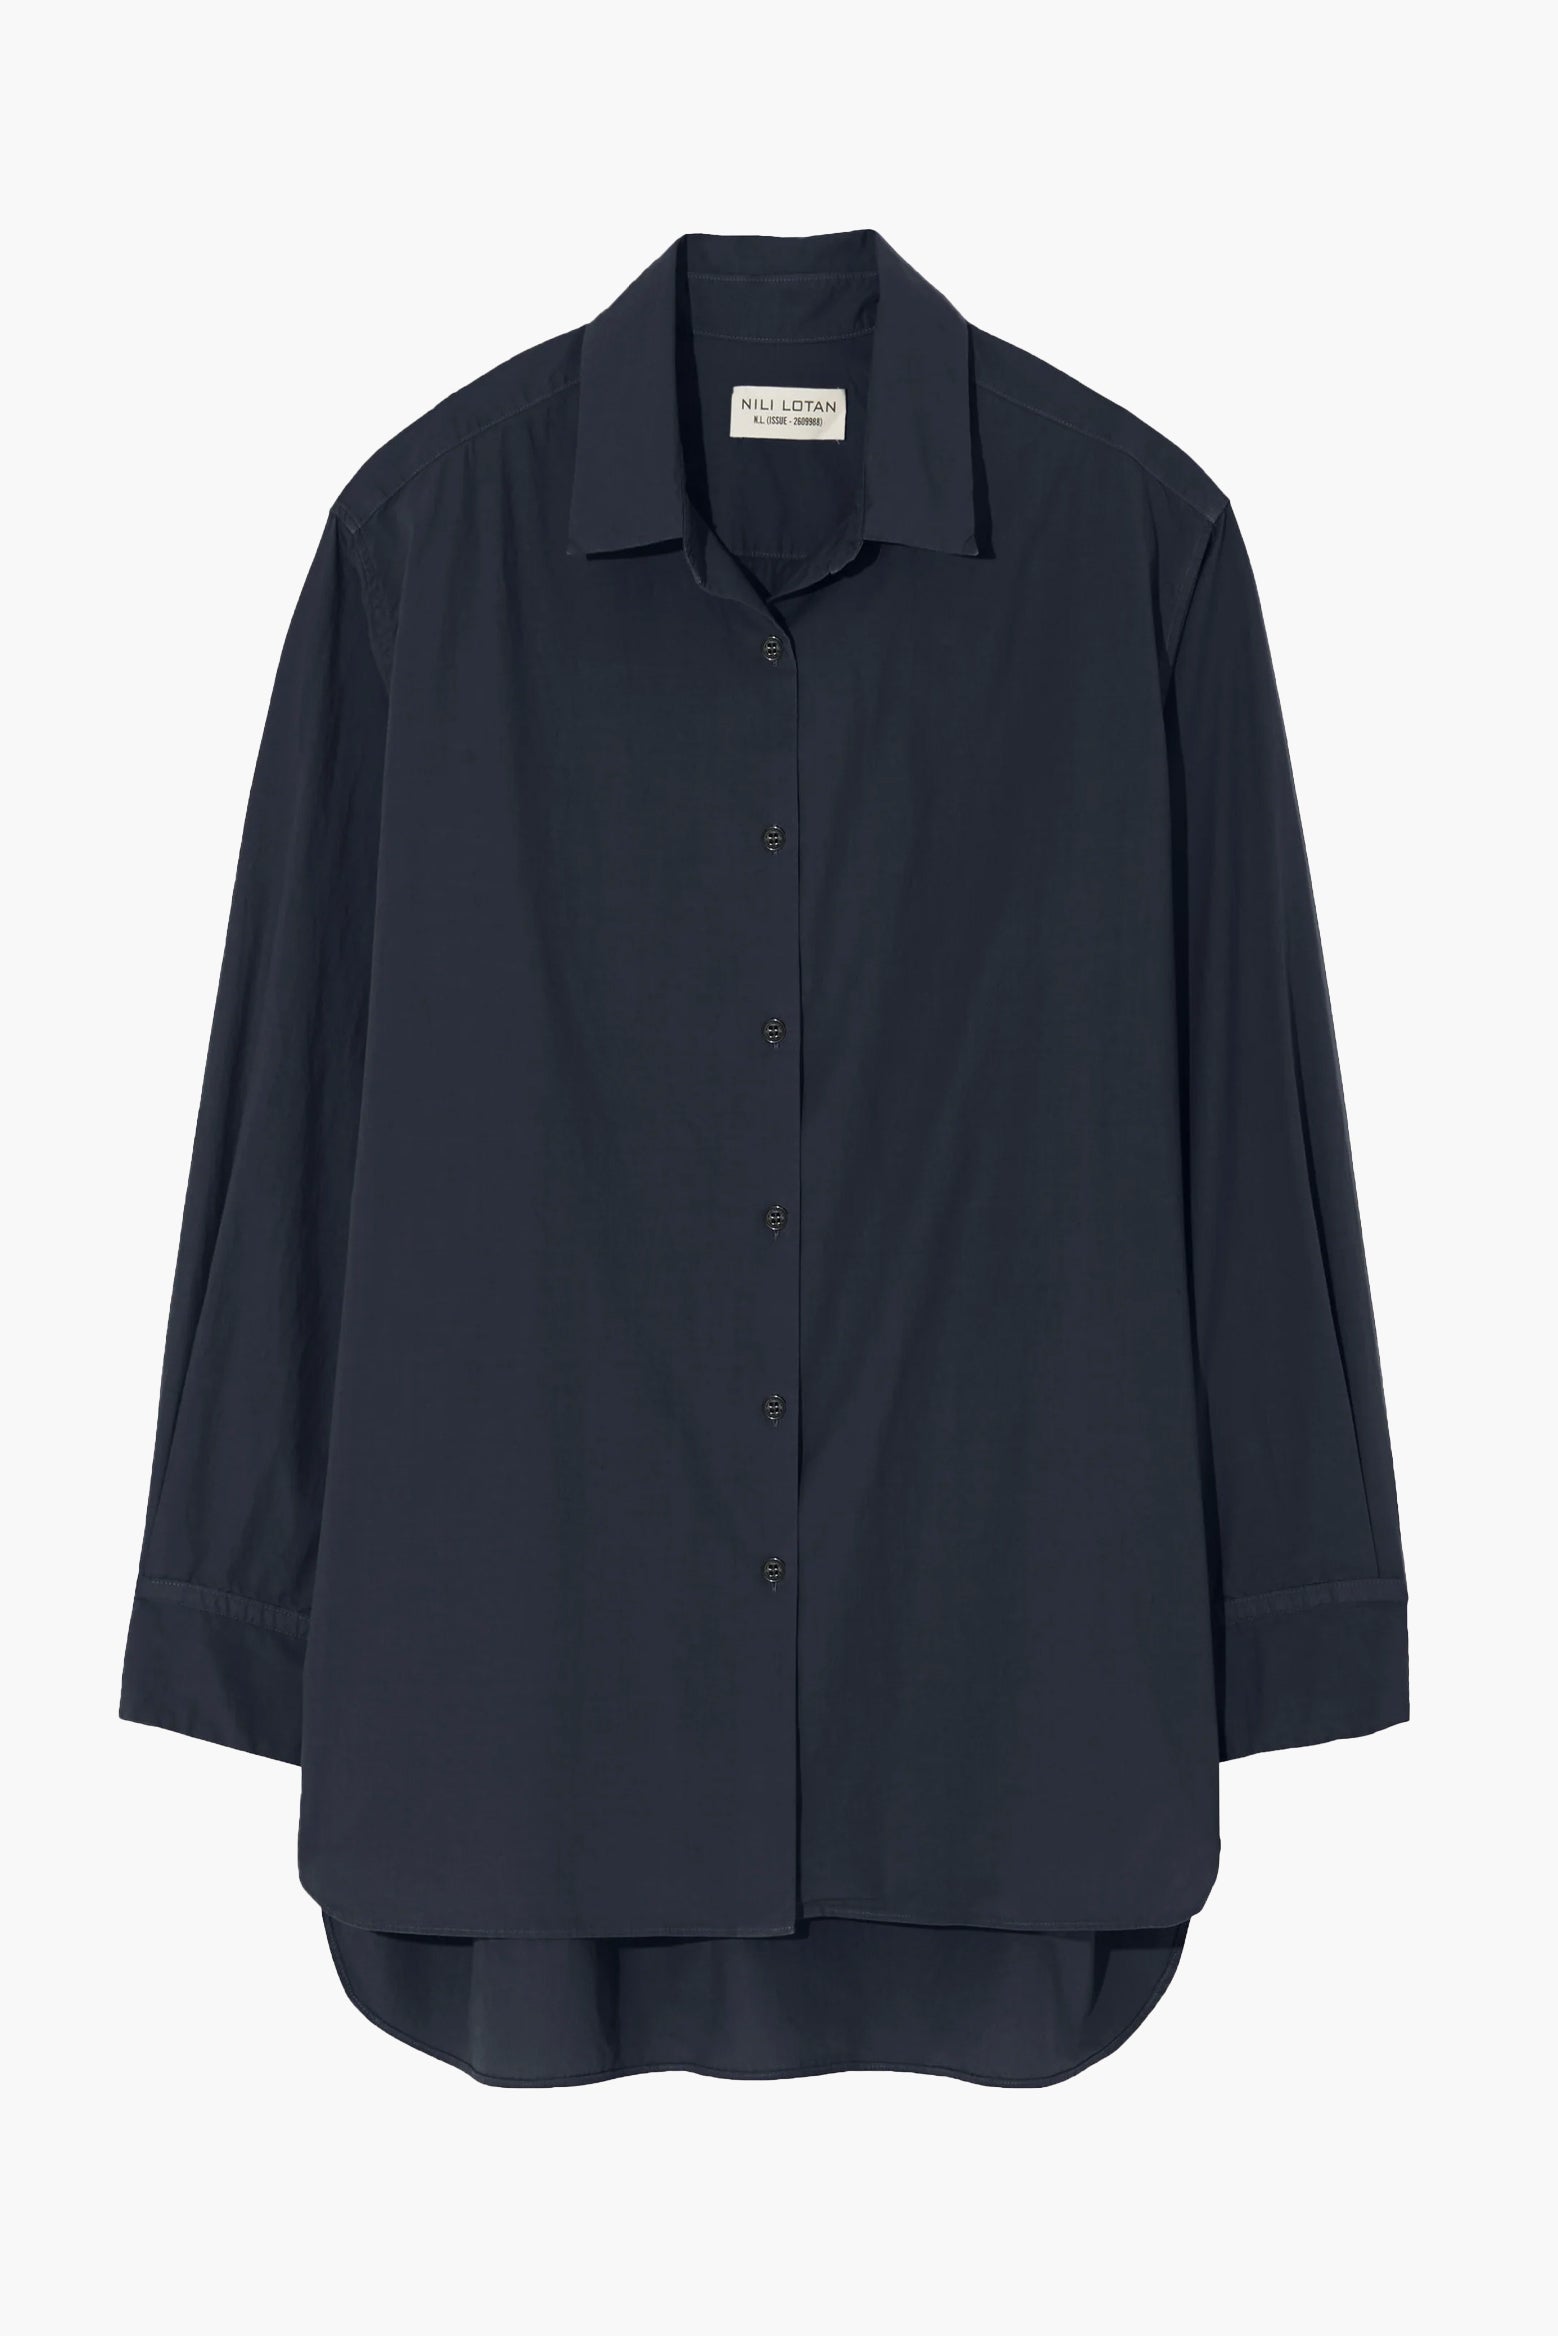 Nili Lotan Yorke Shirt in Midnight available at The New Trend Australia. 